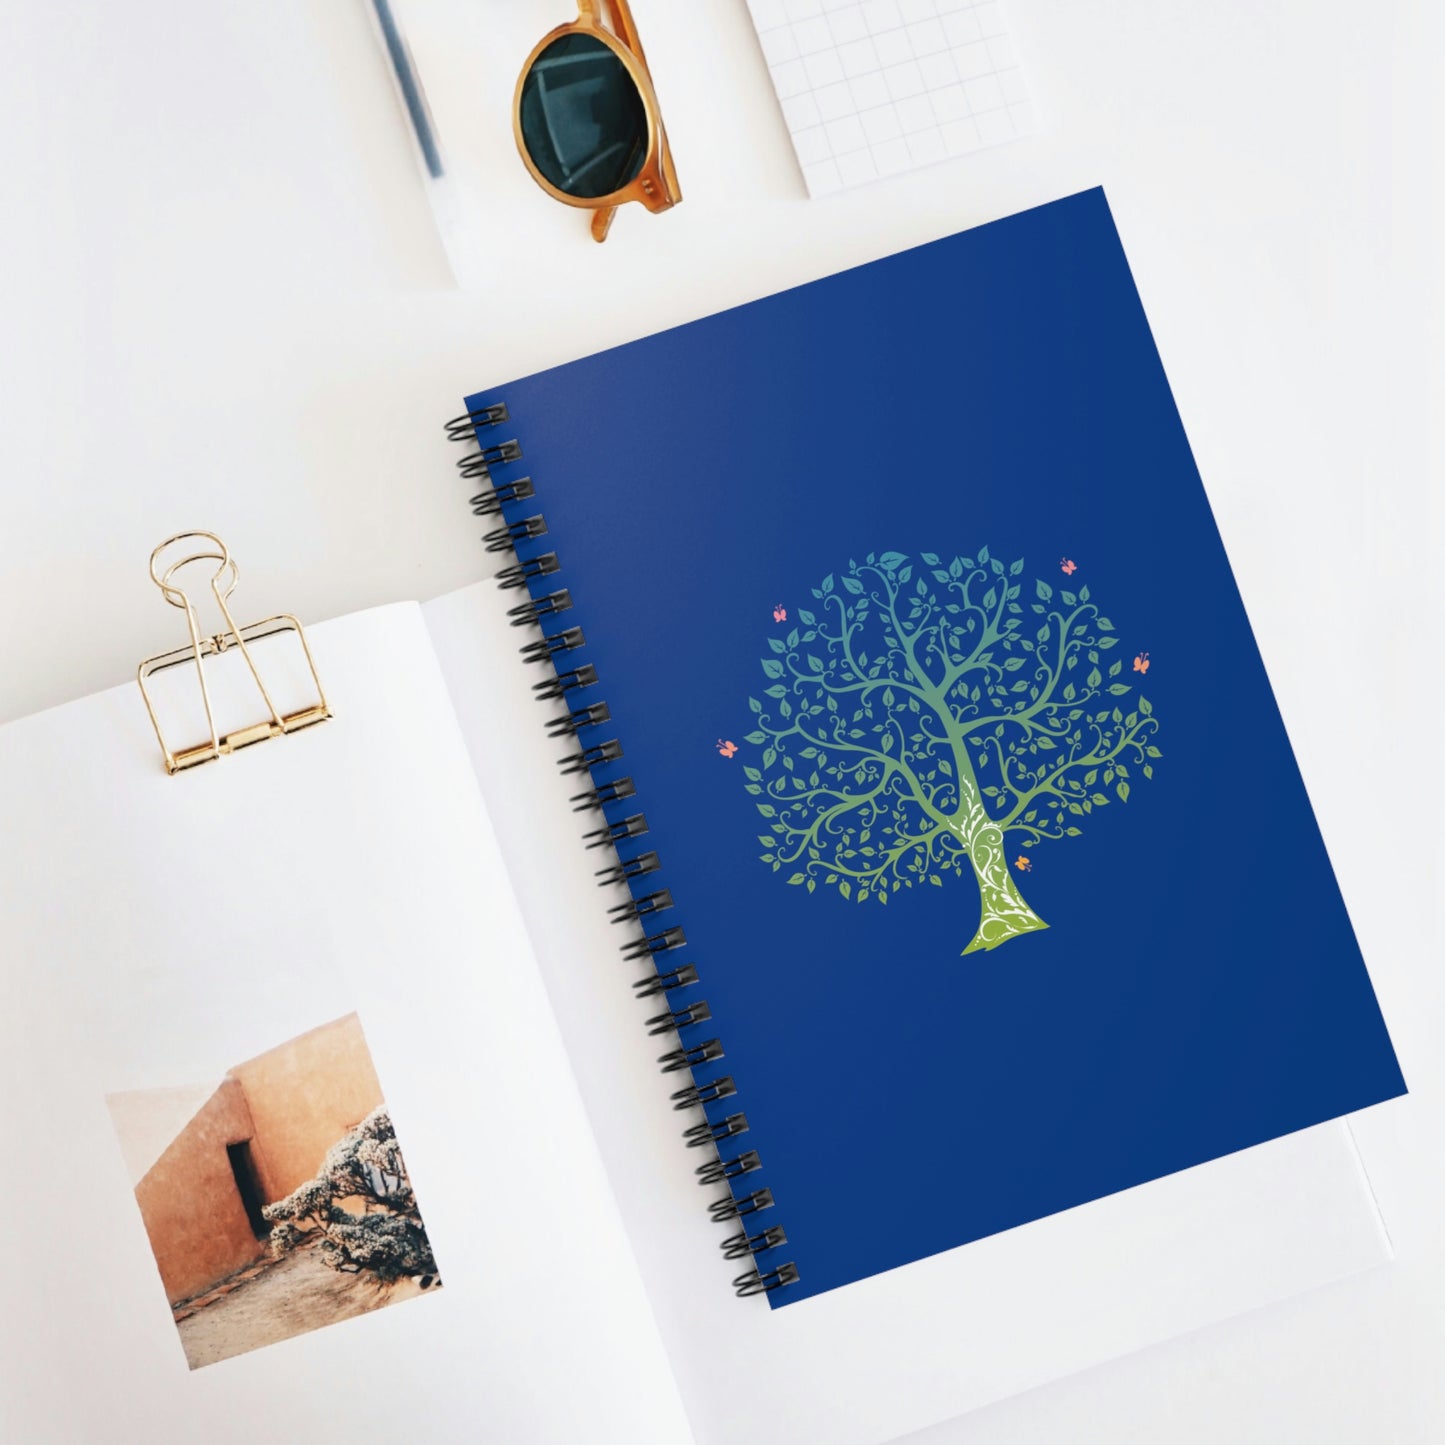 Tree of Life - Spiral Notebook - Ruled Line - Blue Cover